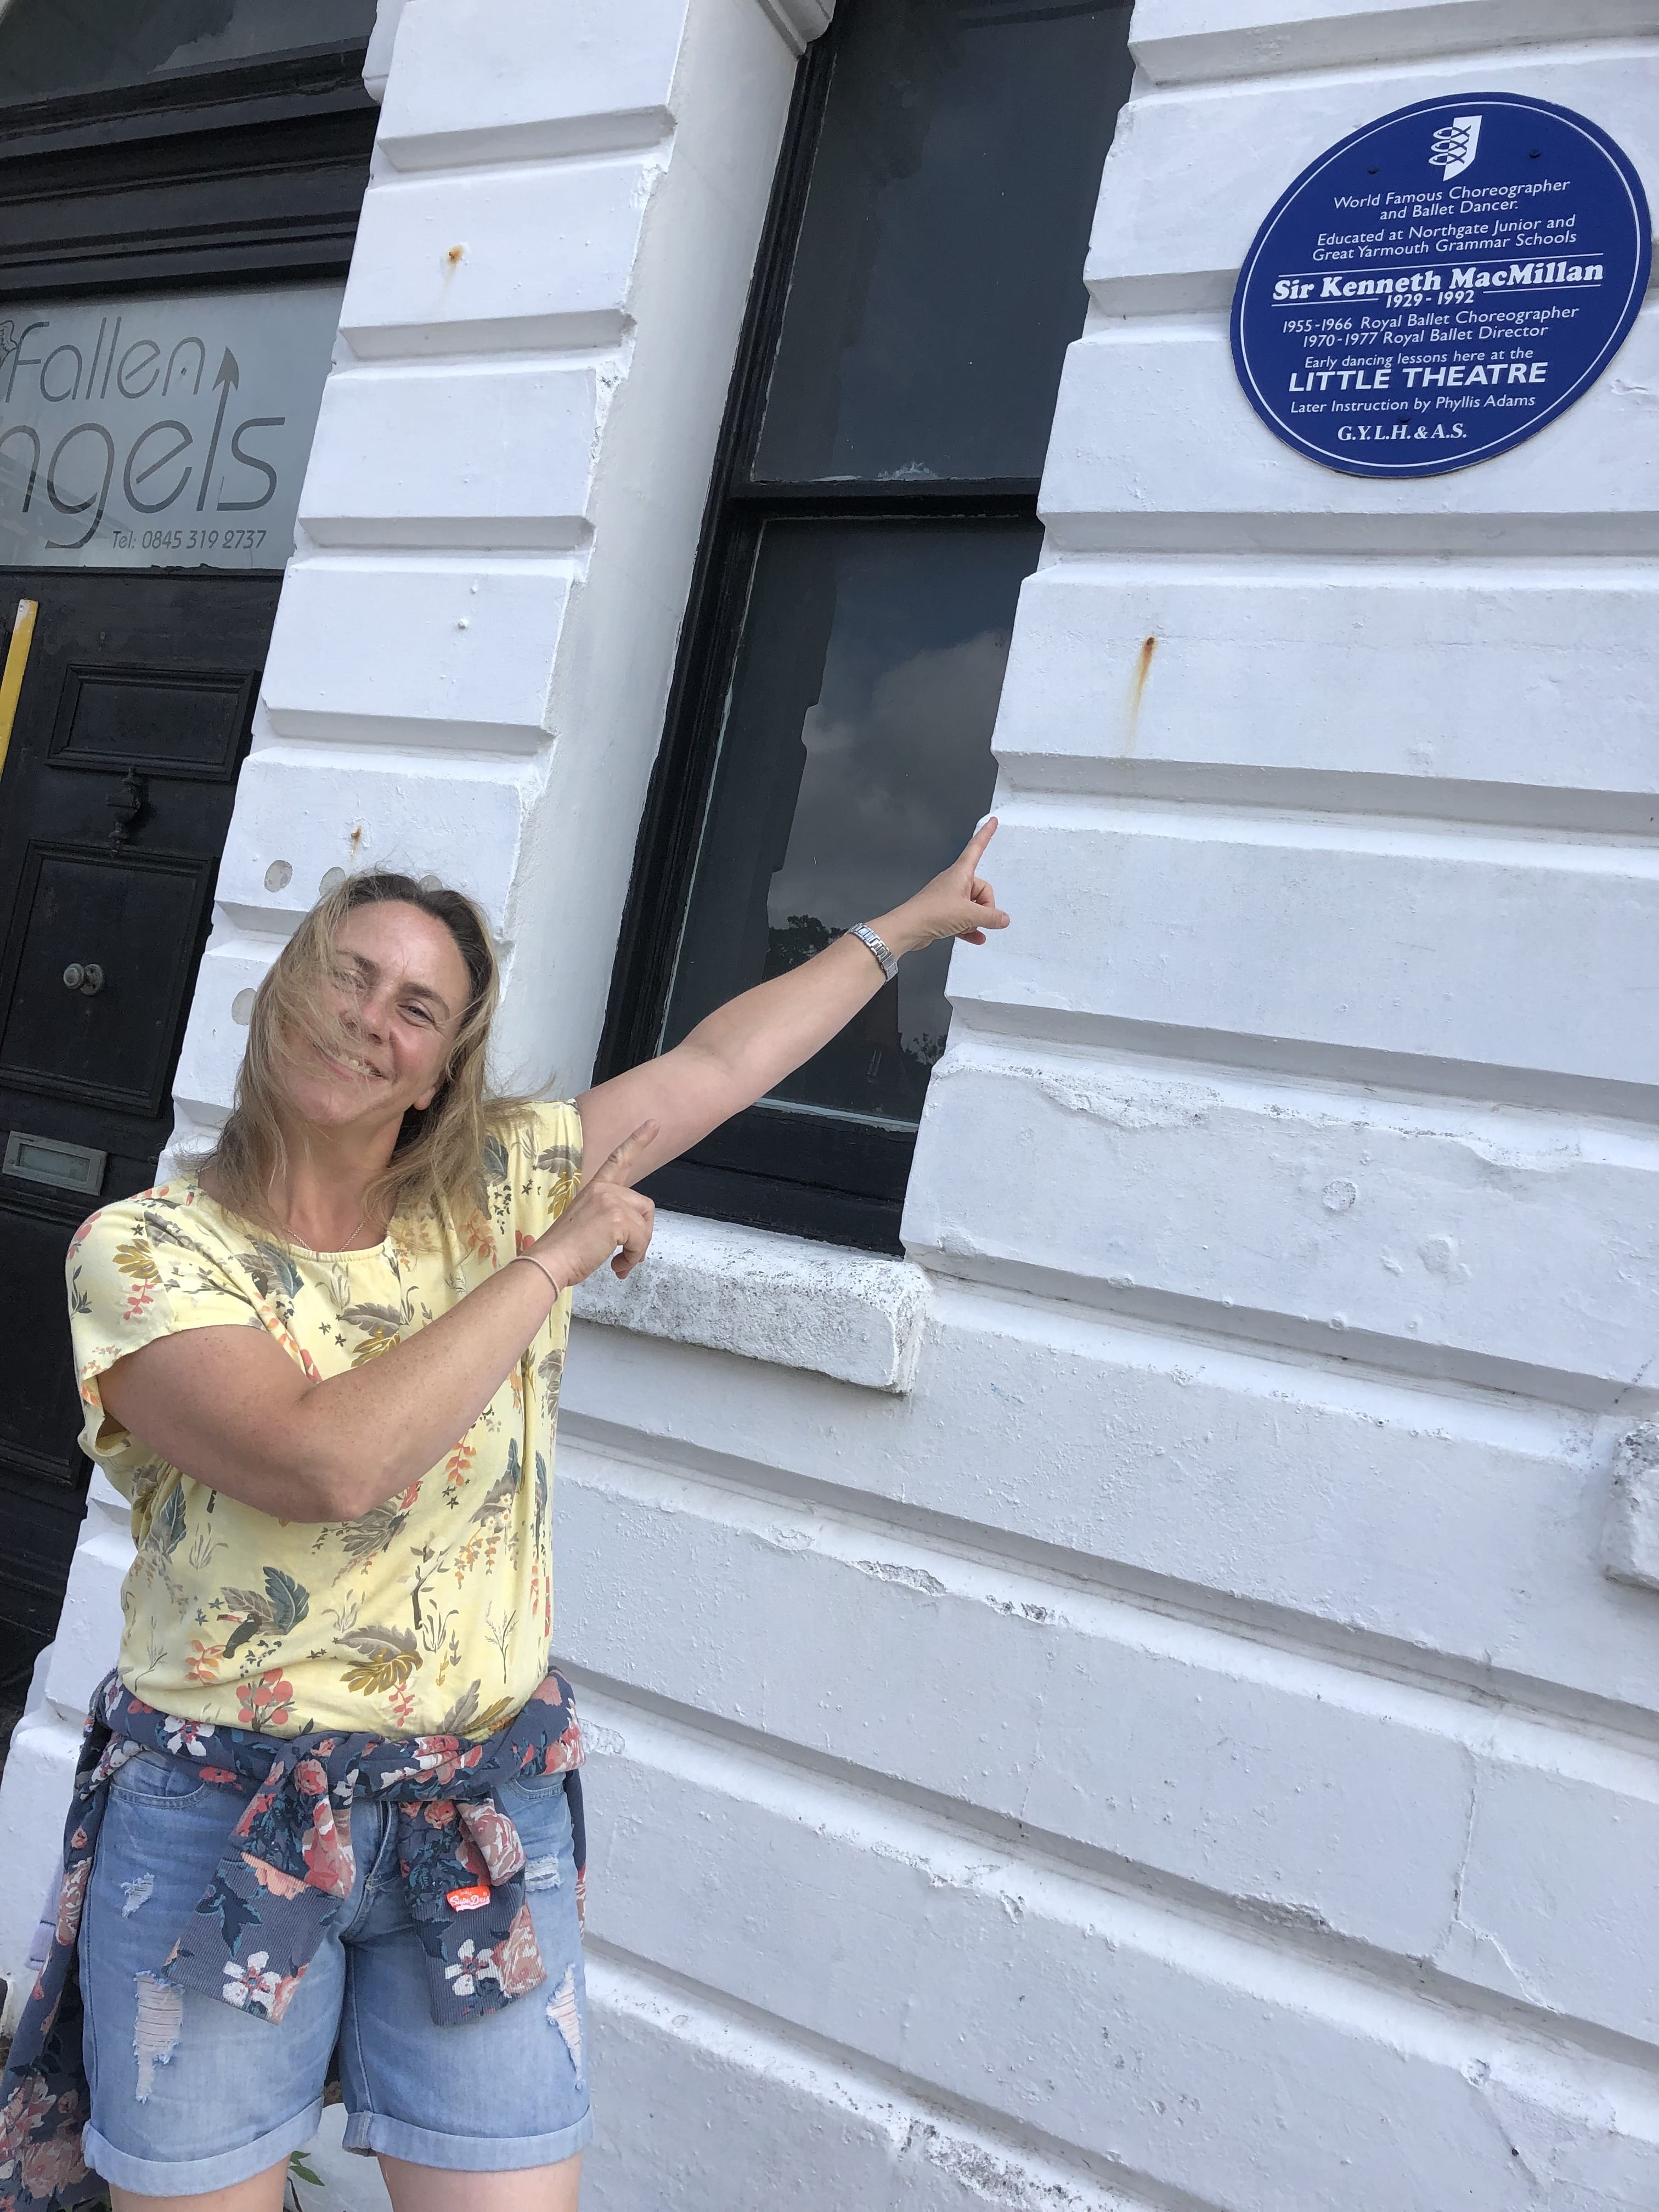 Woman standing in front of and pointing towards a Blue Plaque.